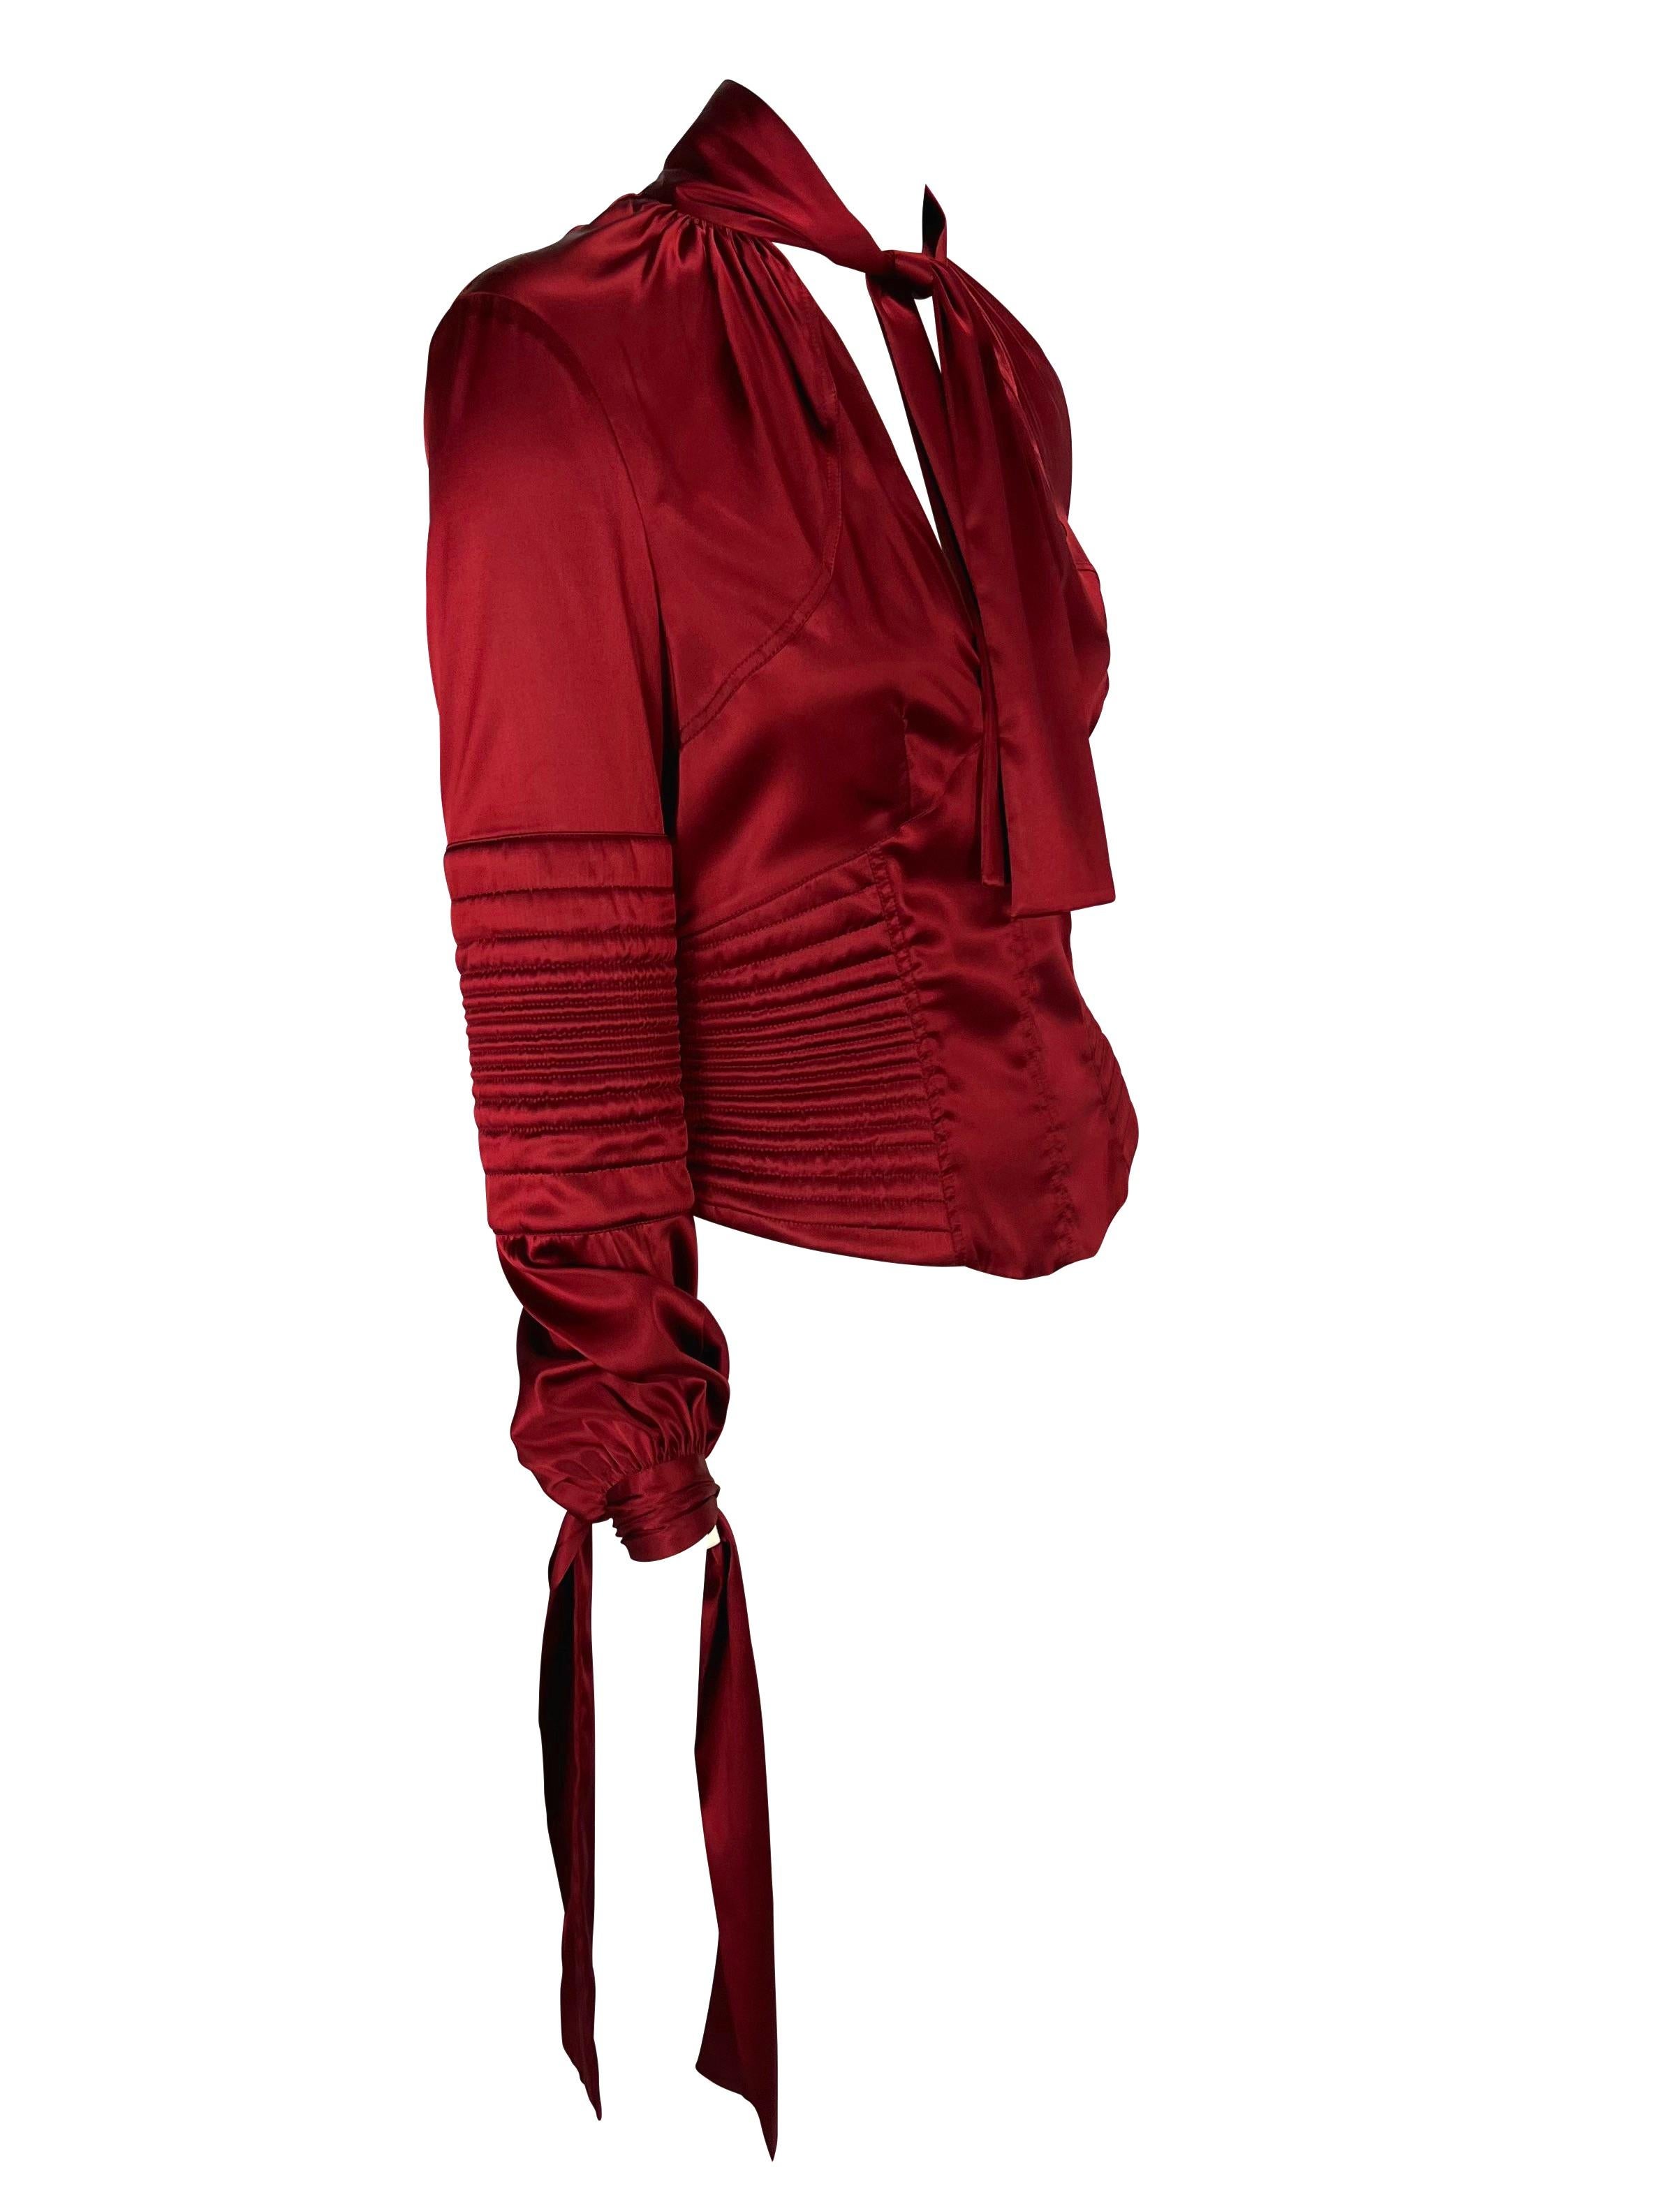 NWT F/W 2003 Gucci by Tom Ford Deep Red Stretch Satin Quilted Corset Tie Blouse For Sale 2